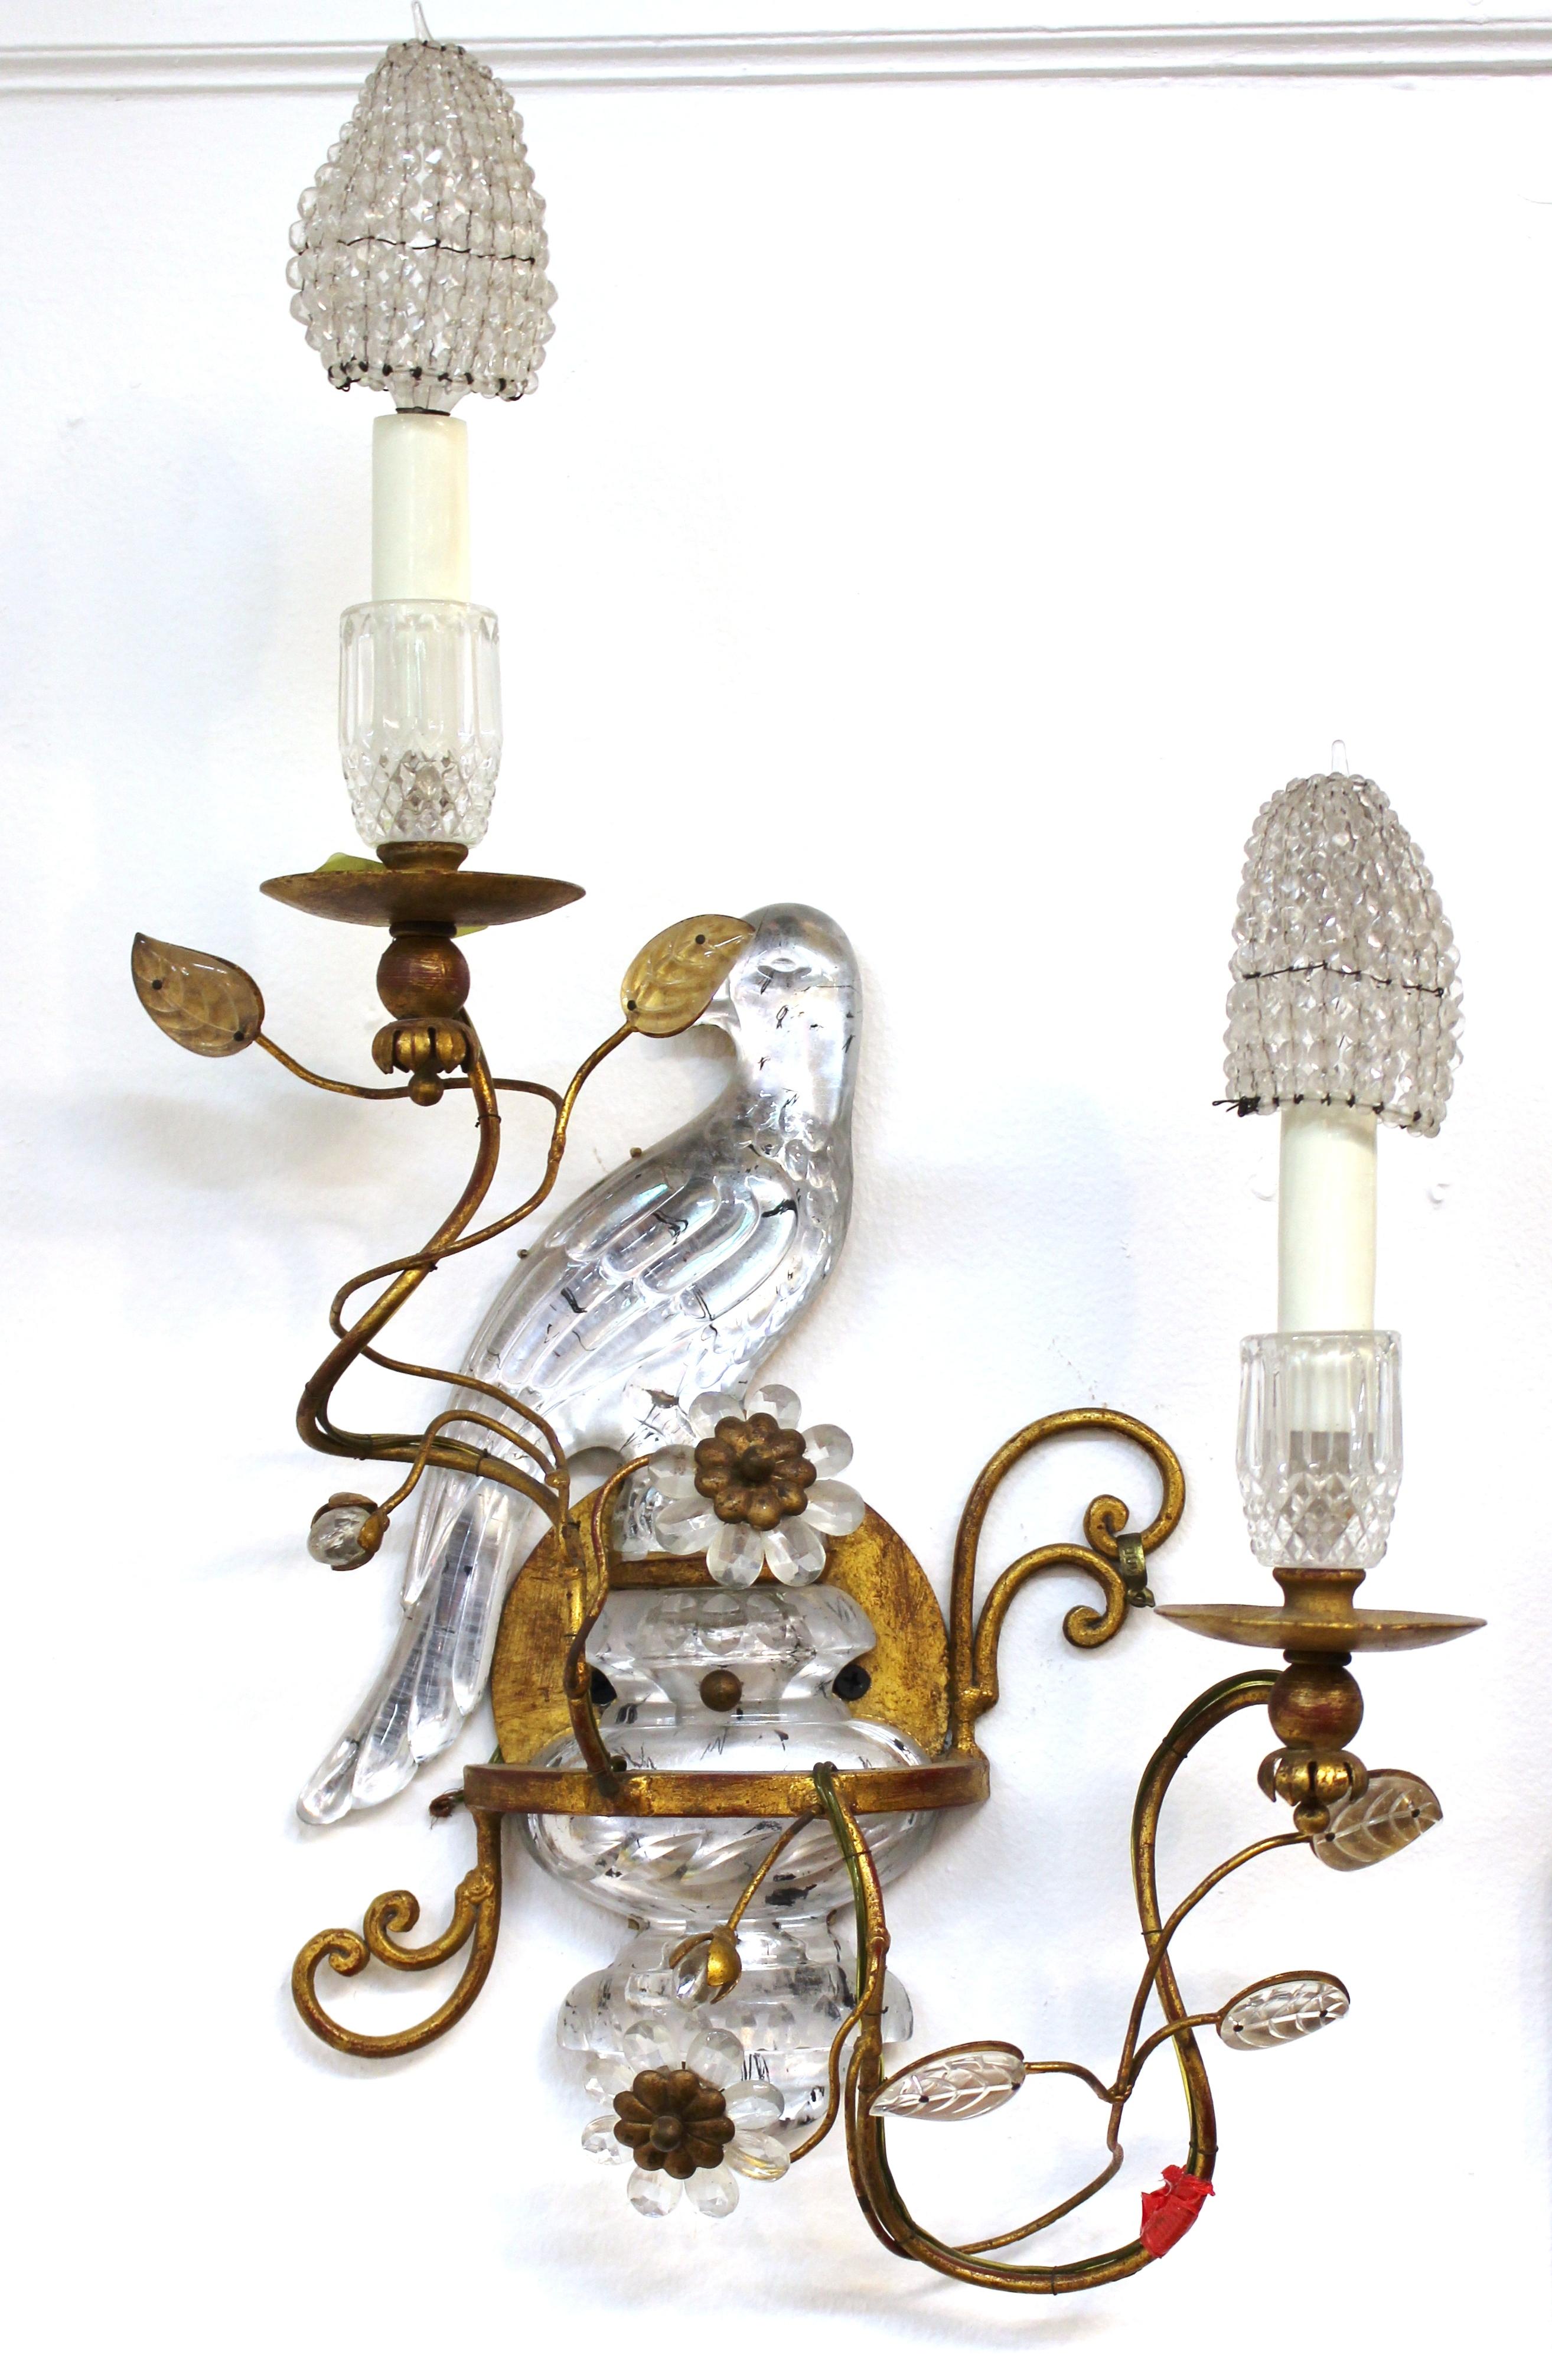 Maison Baguès French pair of sconces with rock crystal birds and foliage on brass frames. The pair comes with beaded crystal covers for the light bulbs and is in great vintage condition.